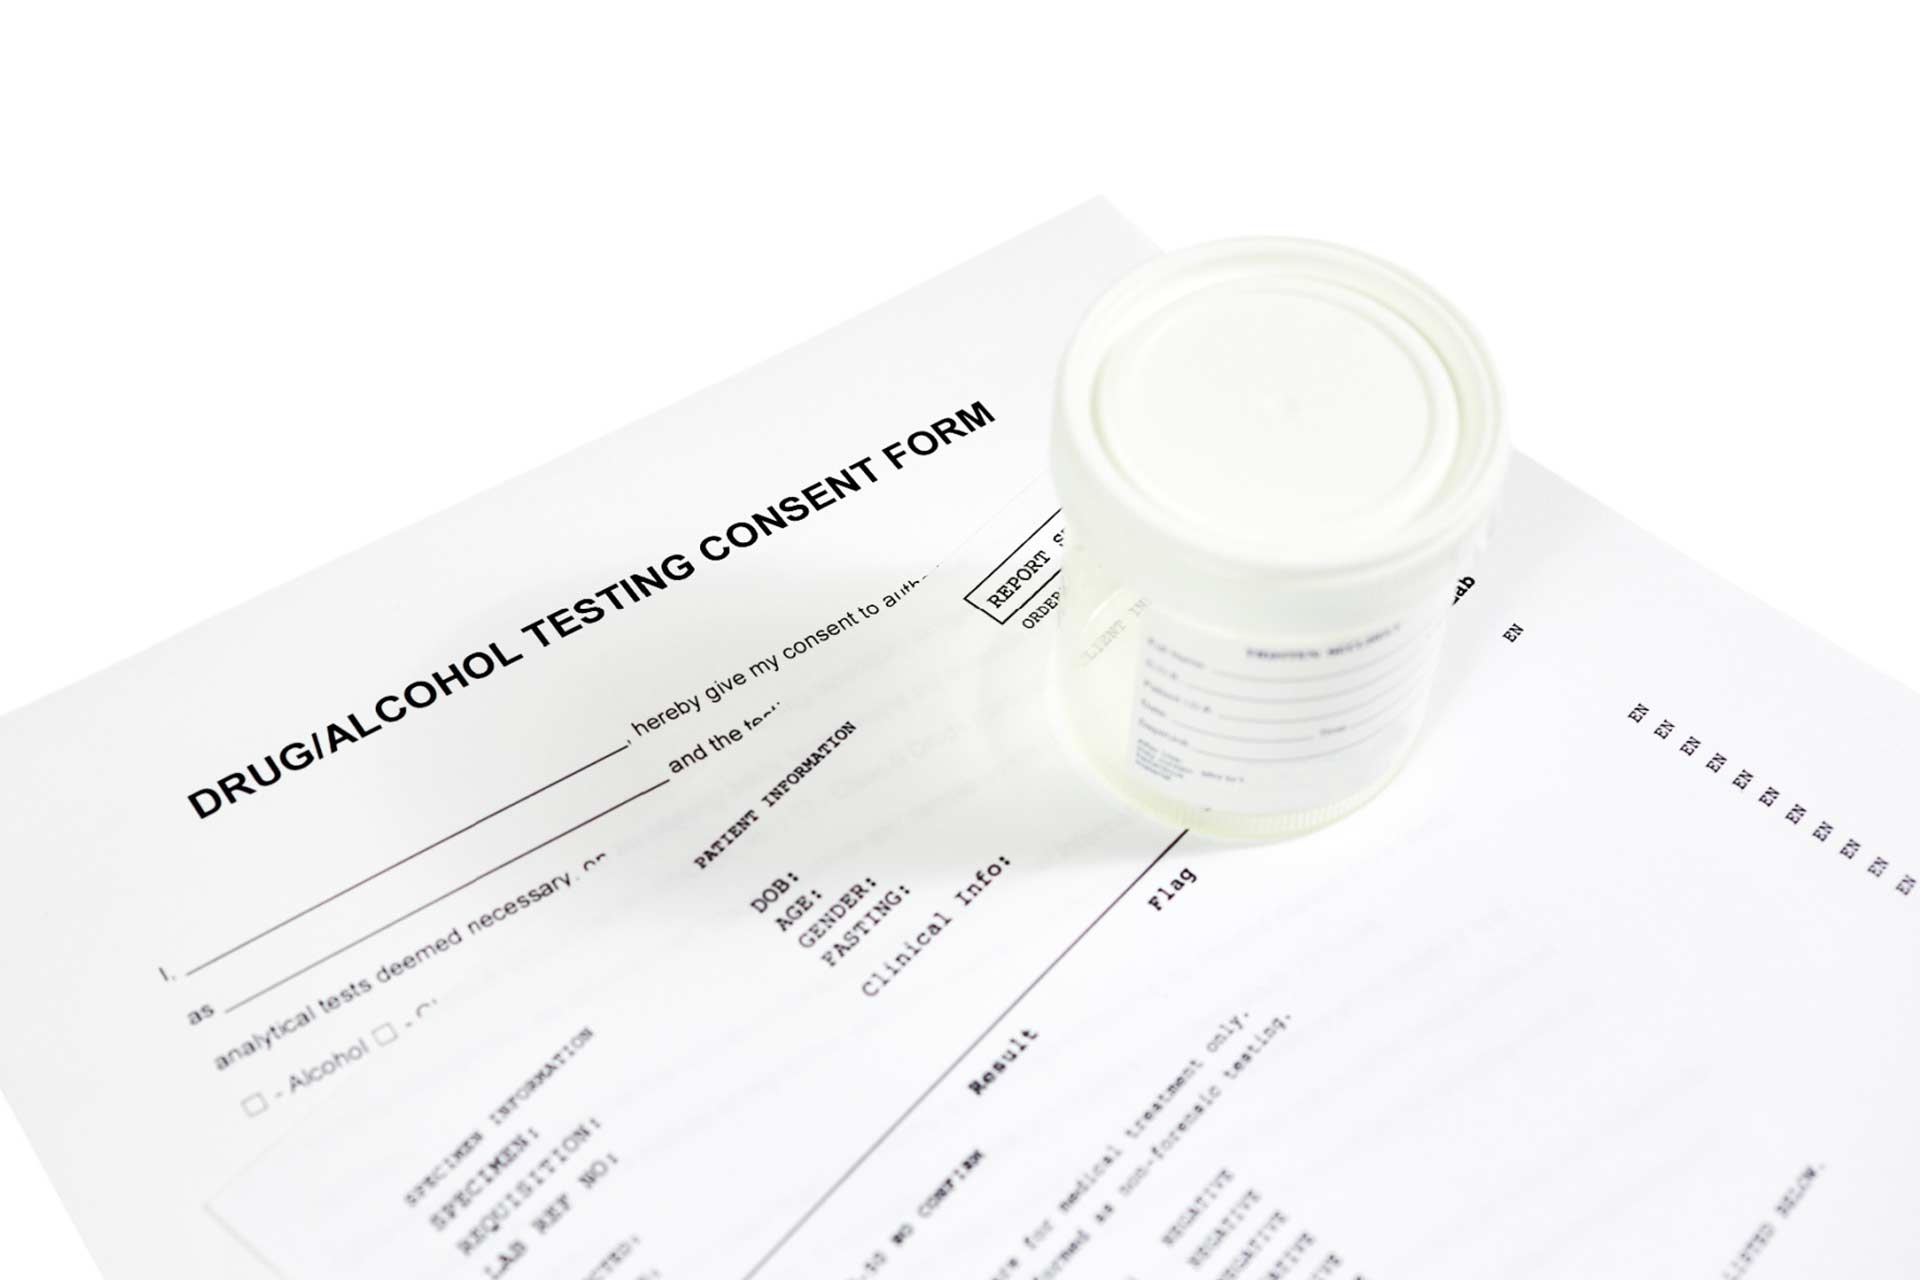 Workplace drug/alcohol testing consent form and urine specimen cup